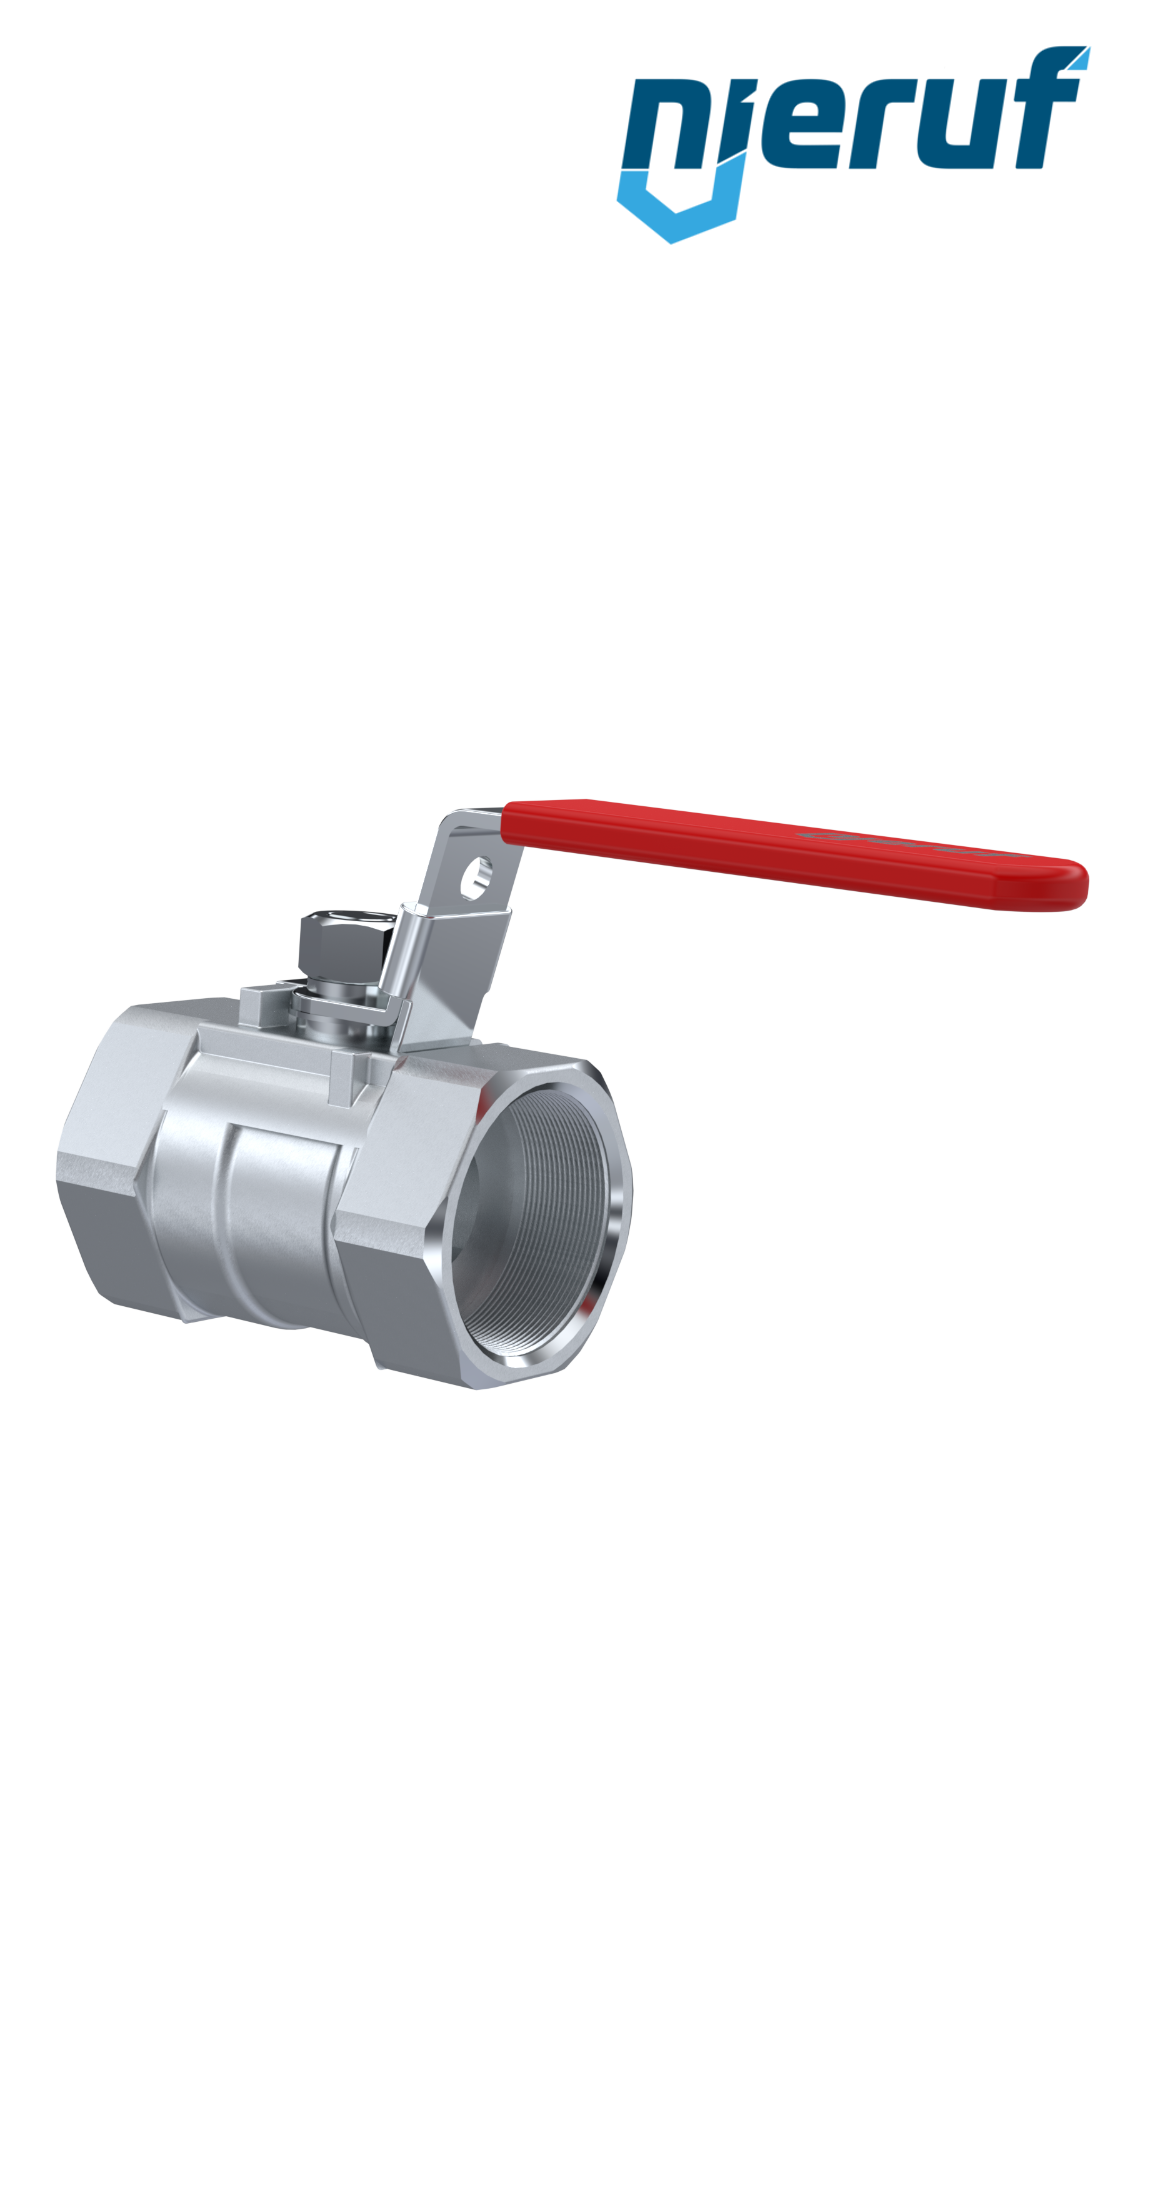 ball valve made of stainless steel DN20 - 3/4" inch GK03